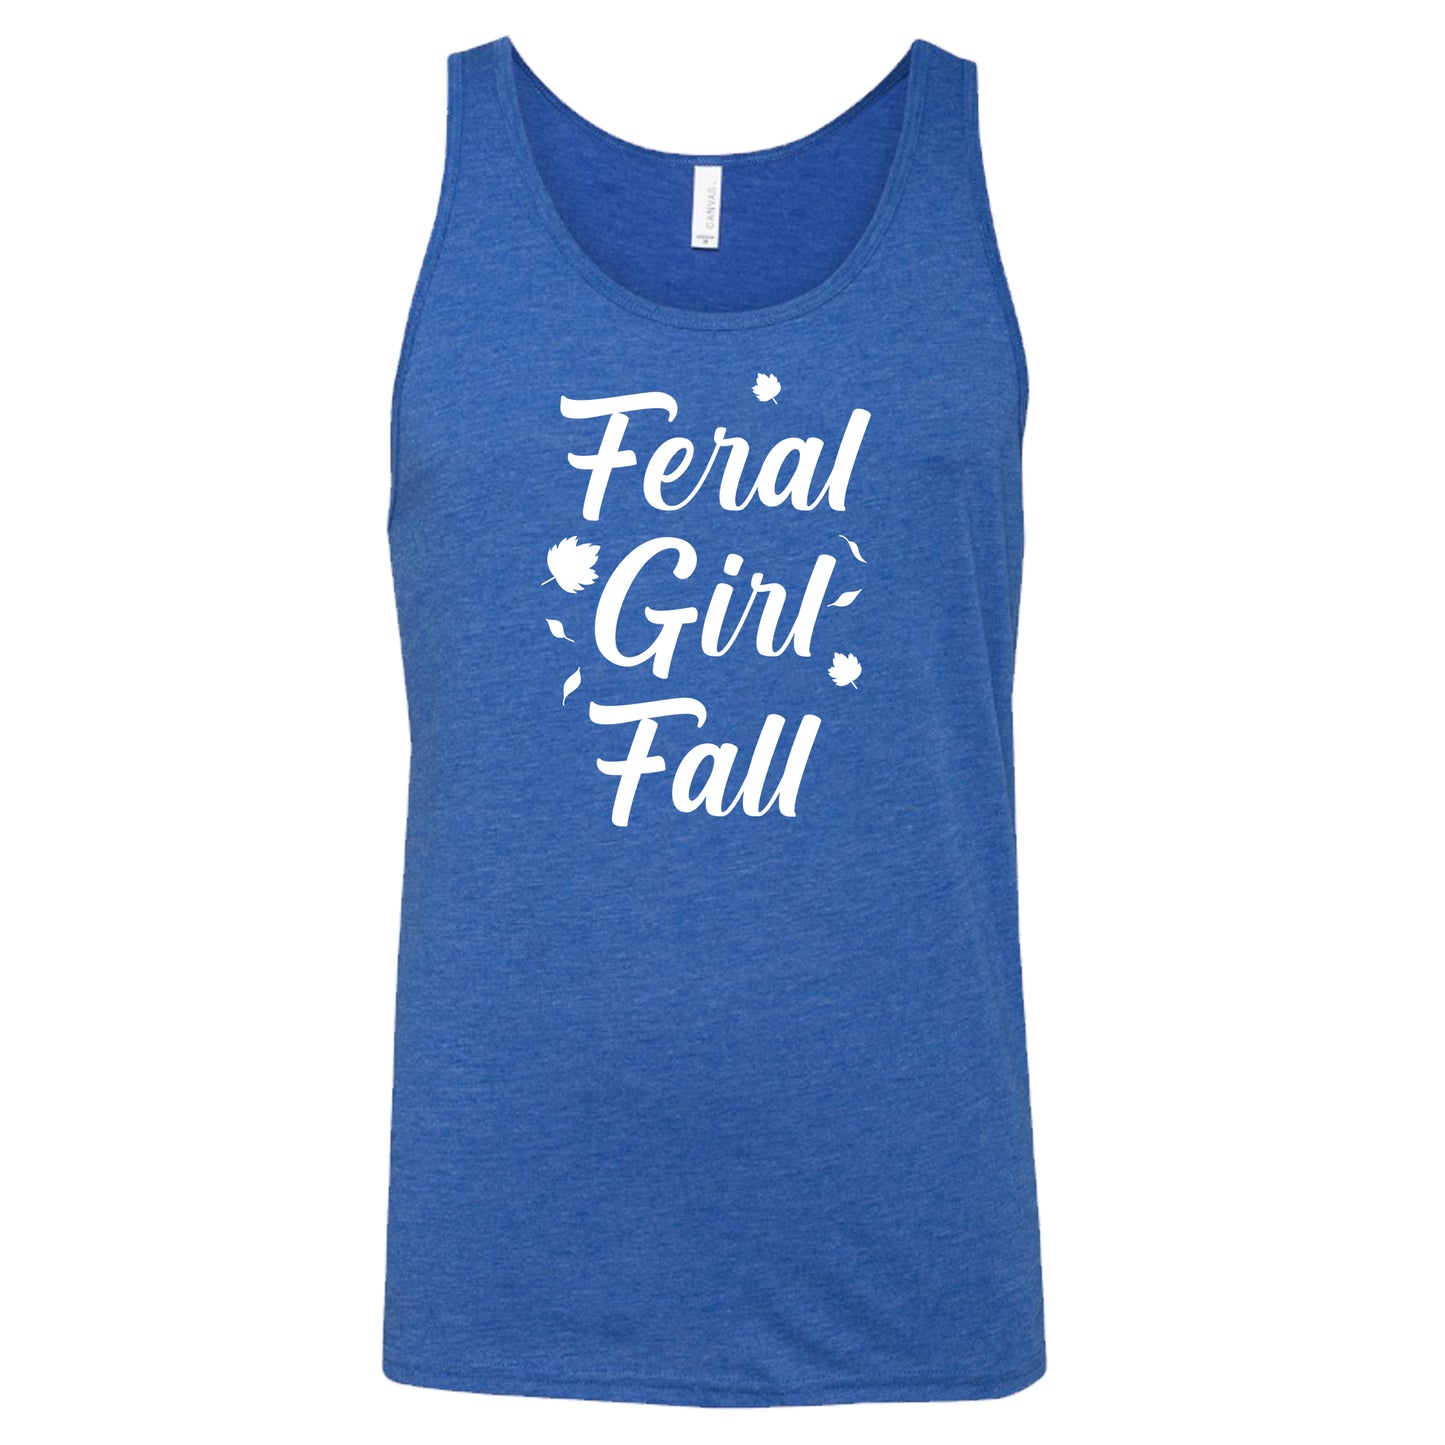 white quote "Feral Girl Fall" on a blue shirt